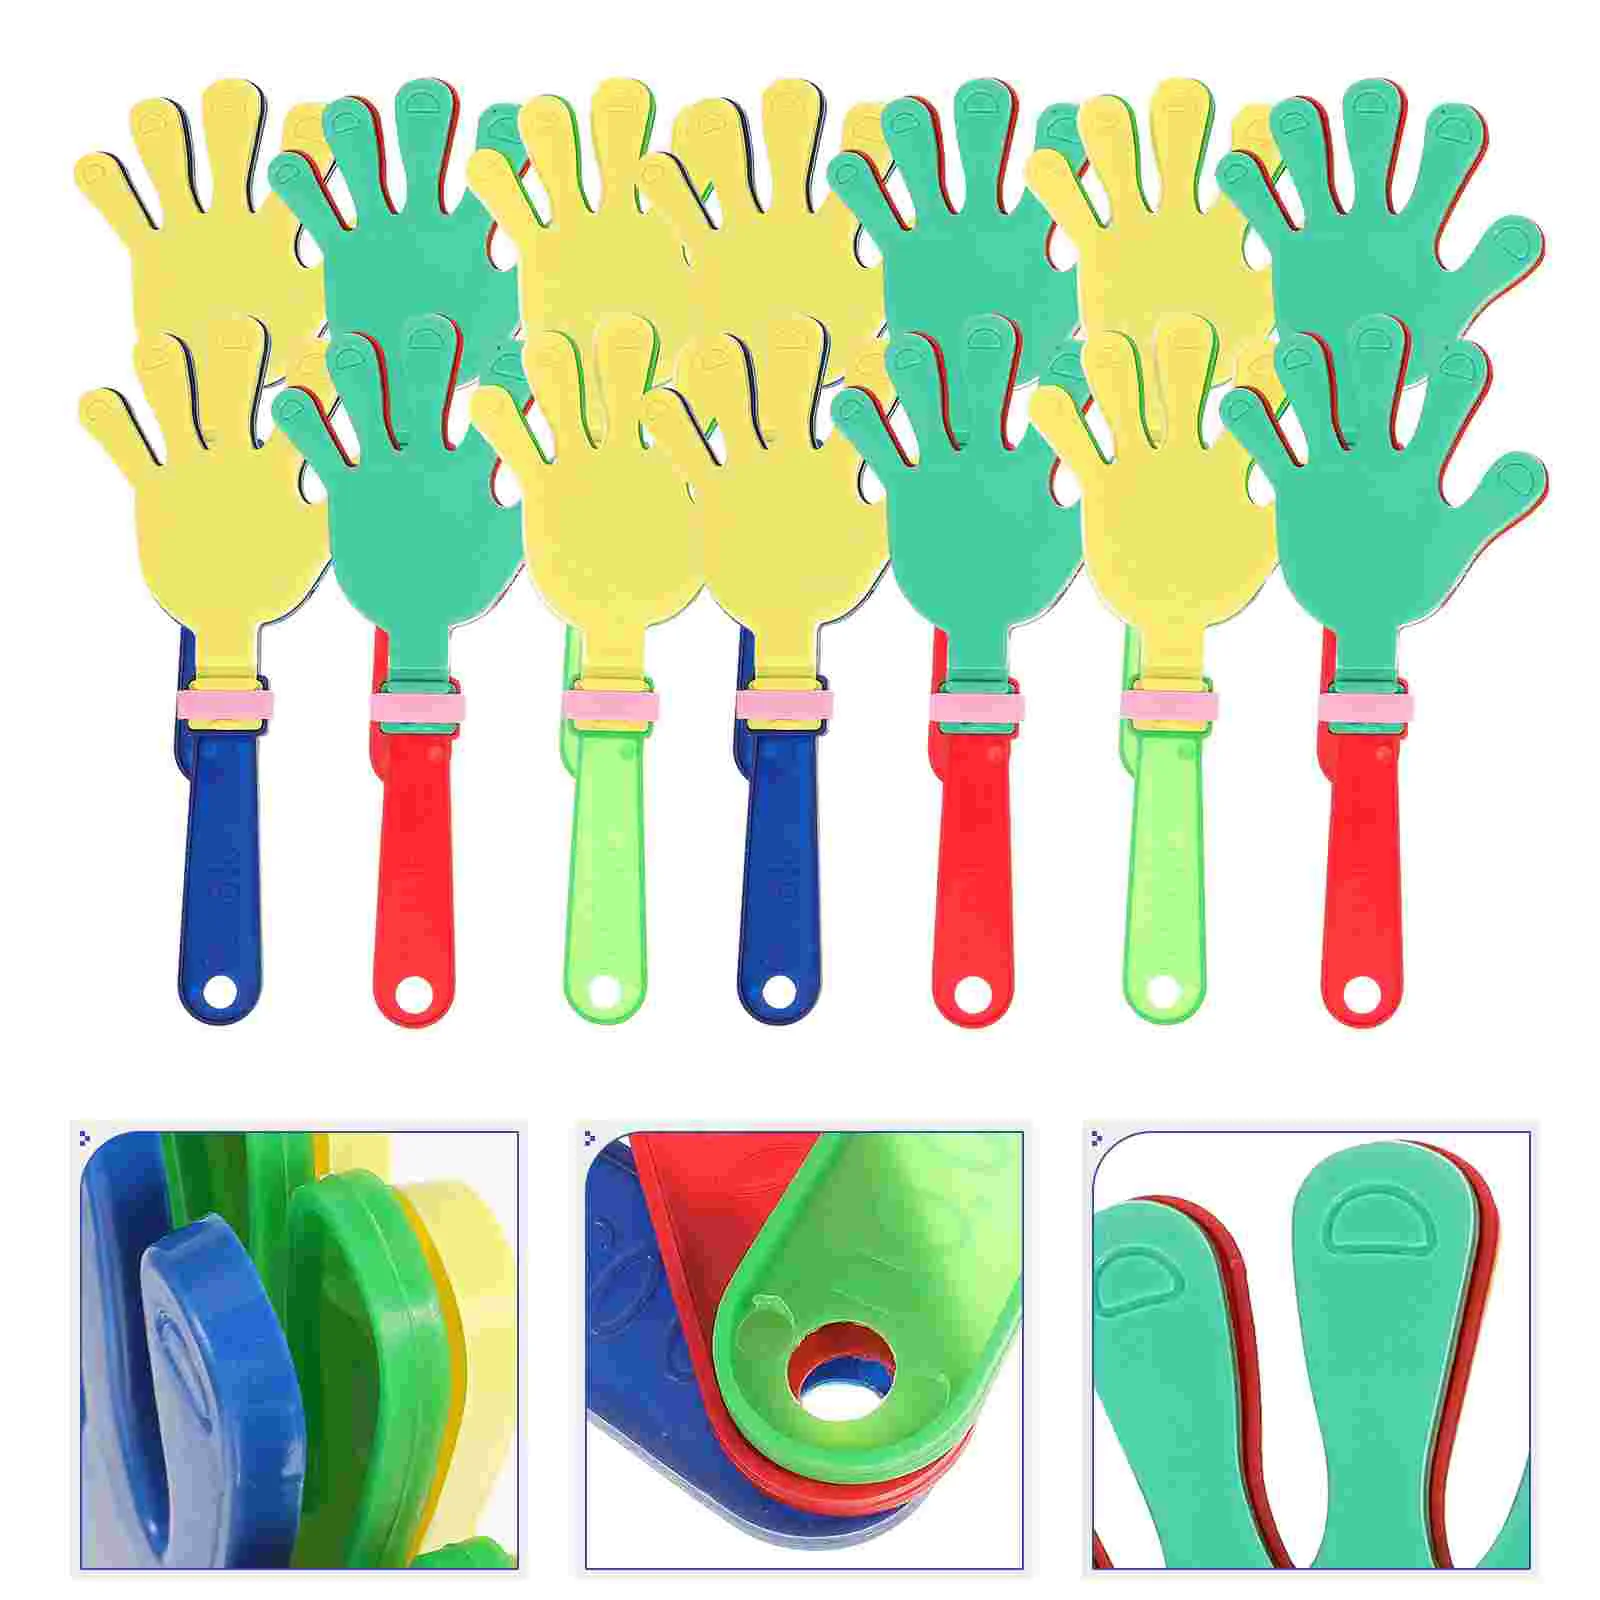 

24 Pcs Clapping Toy Party Favor Goody Bags Kids Sound Making Wedding Props Concert Hands Cheering